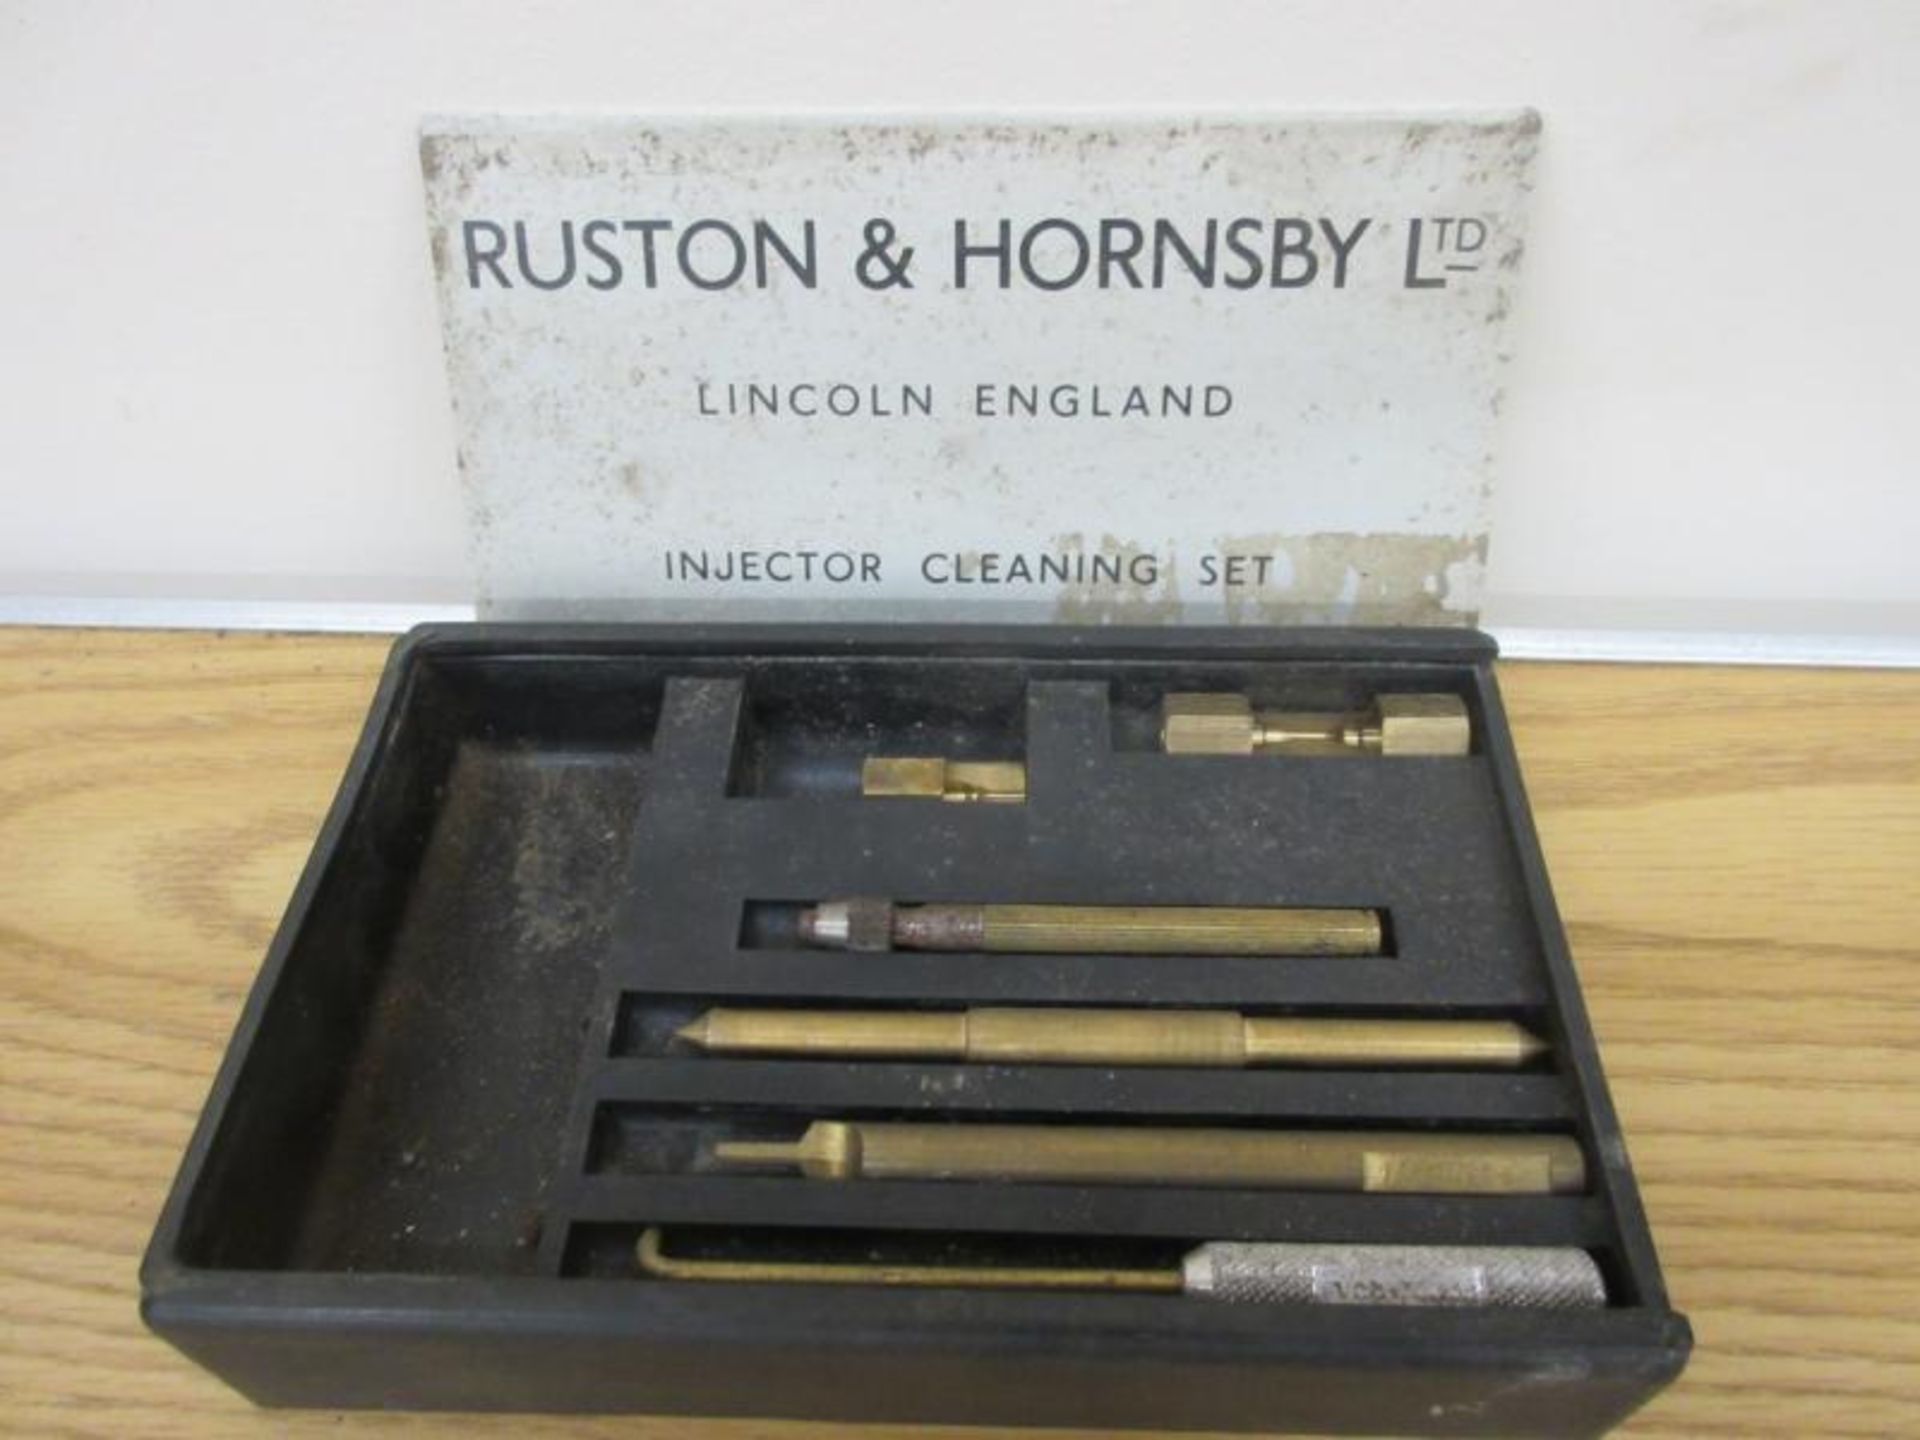 Ruston & Hornsby injector cleaning set